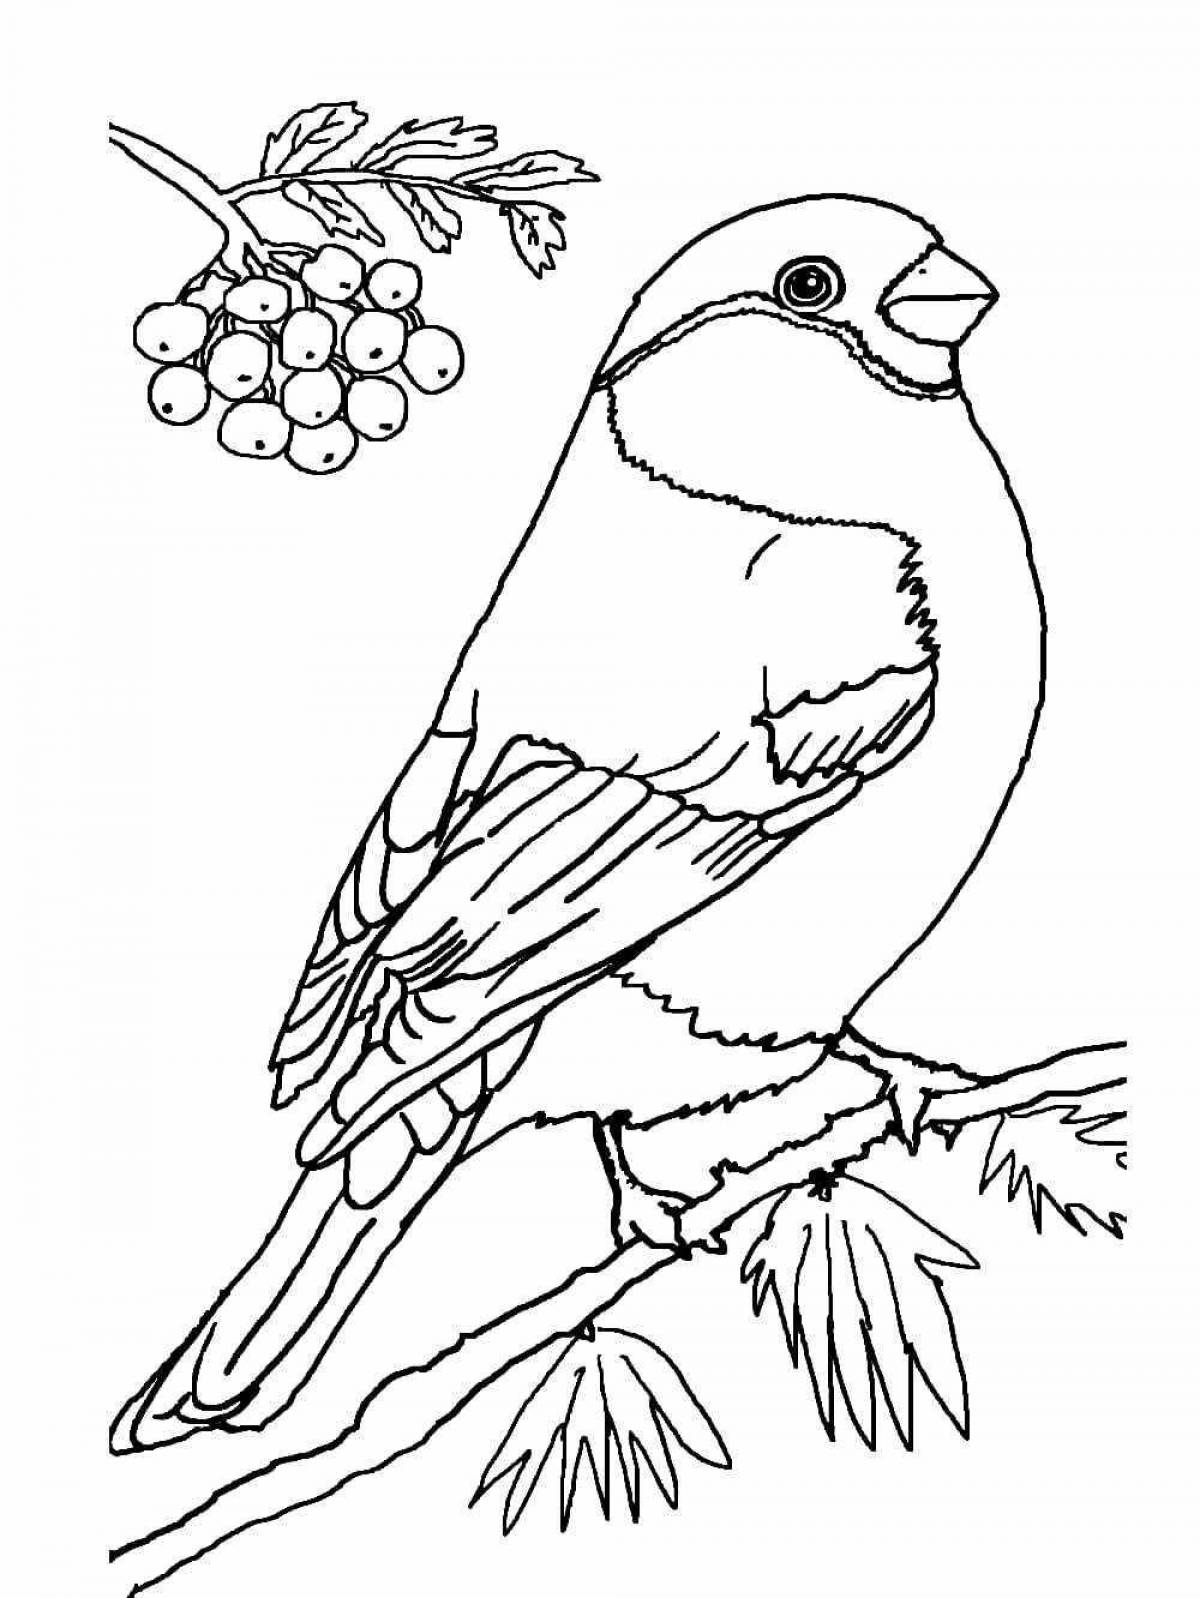 Attractive drawing of a bullfinch coloring for children